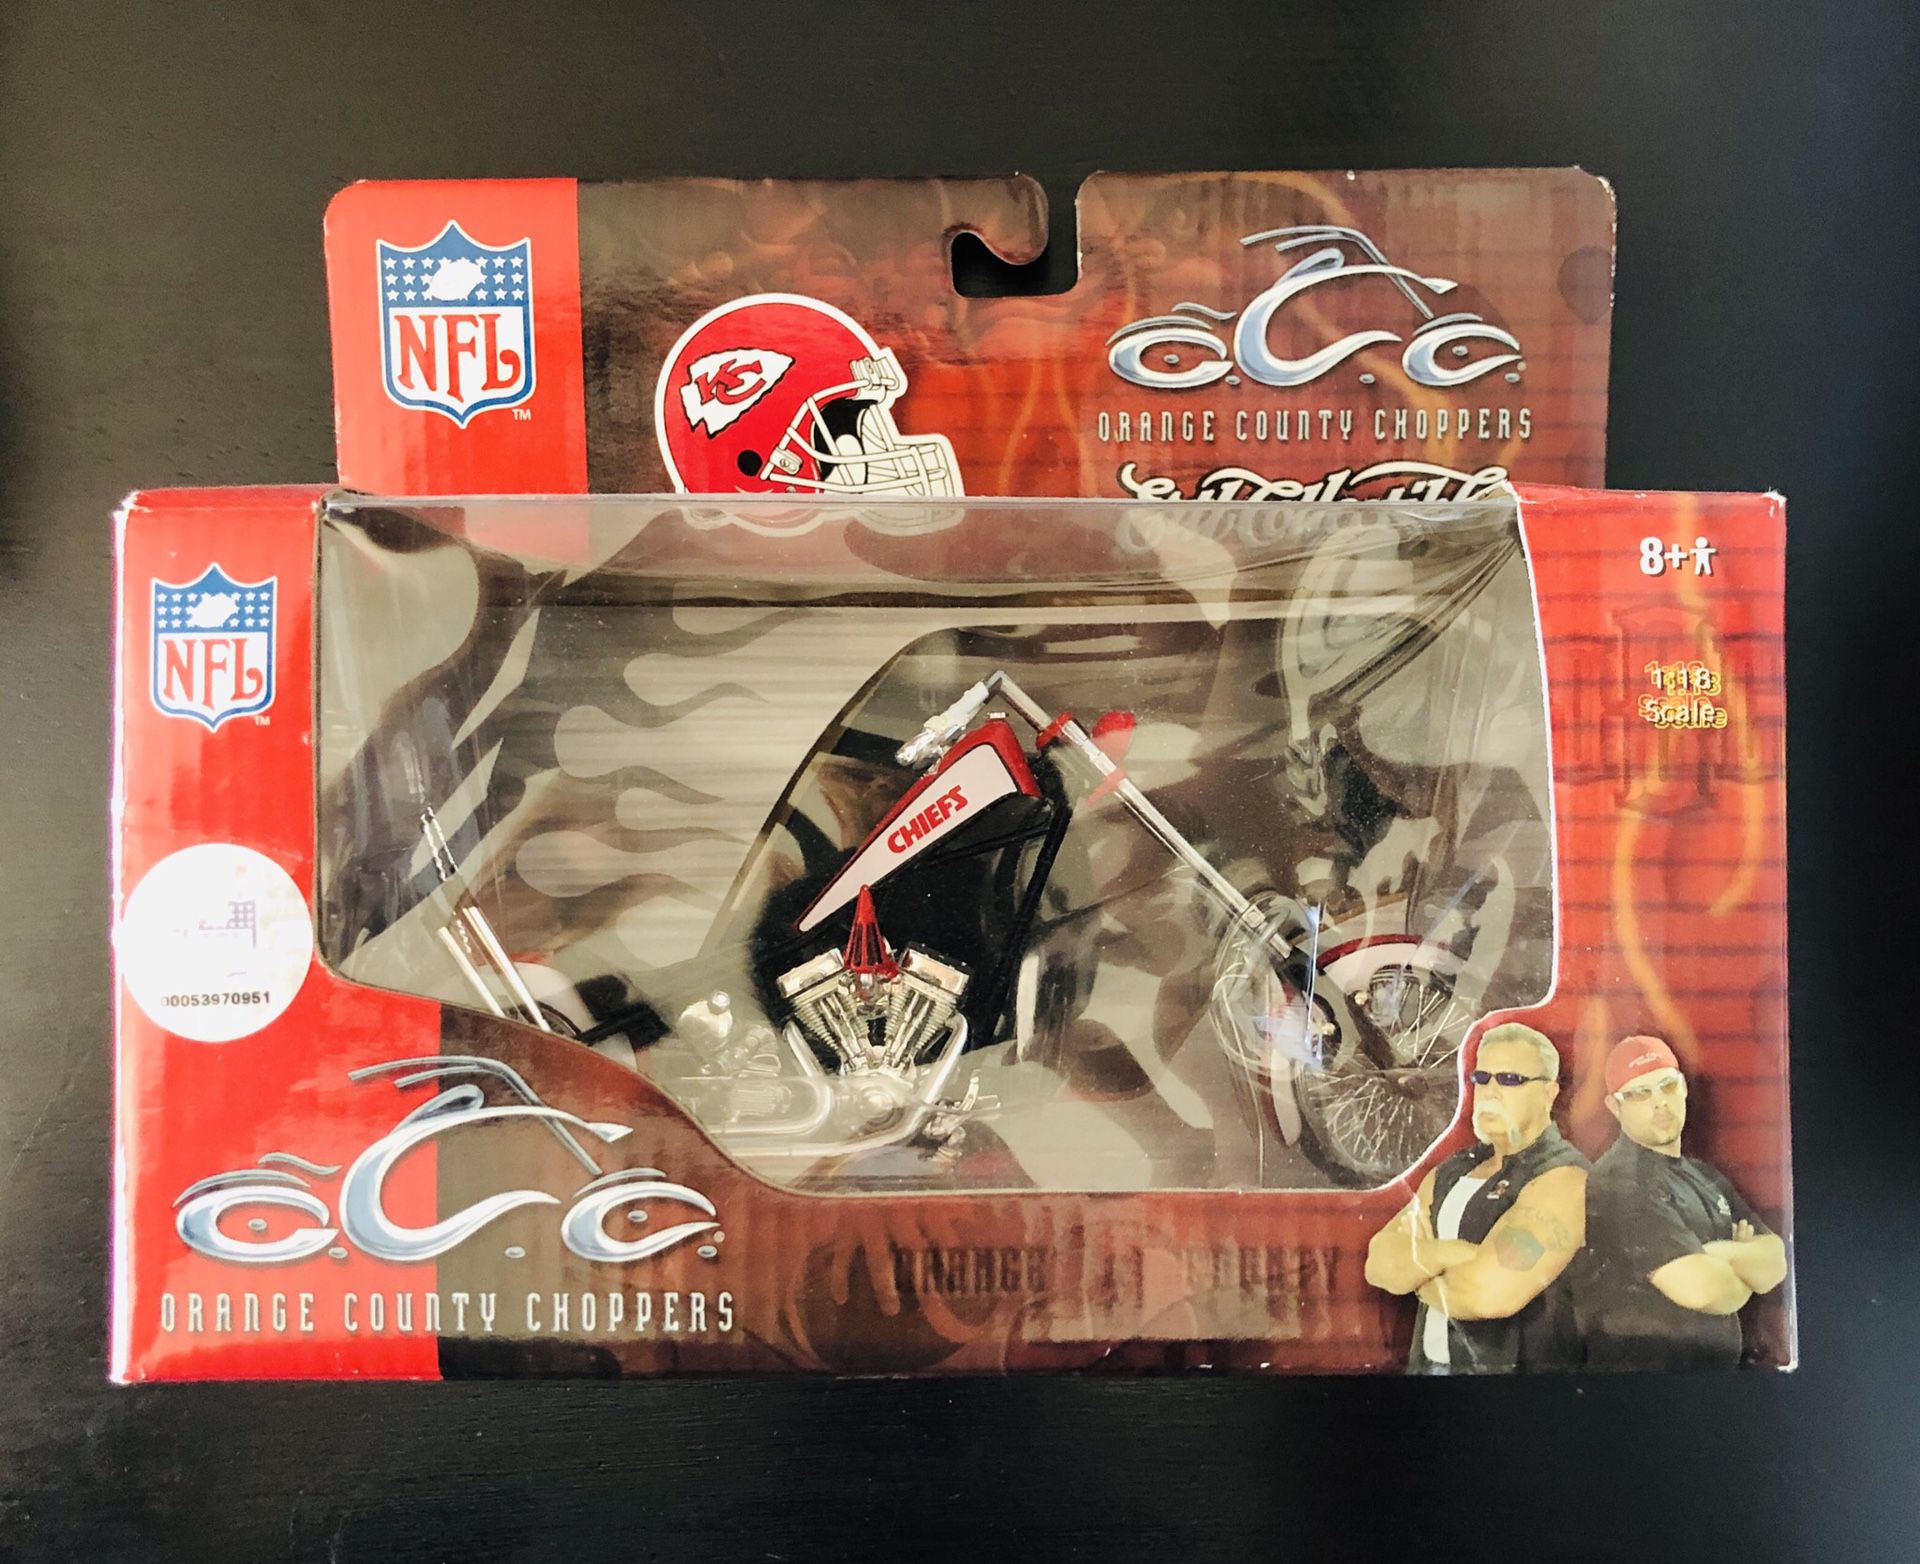 Kansas City Chiefs NFL Football Orange County Choppers 1:18 Scale Motorcycle Model Toy by Ertl Collectibles Display - BRAND NEW!!